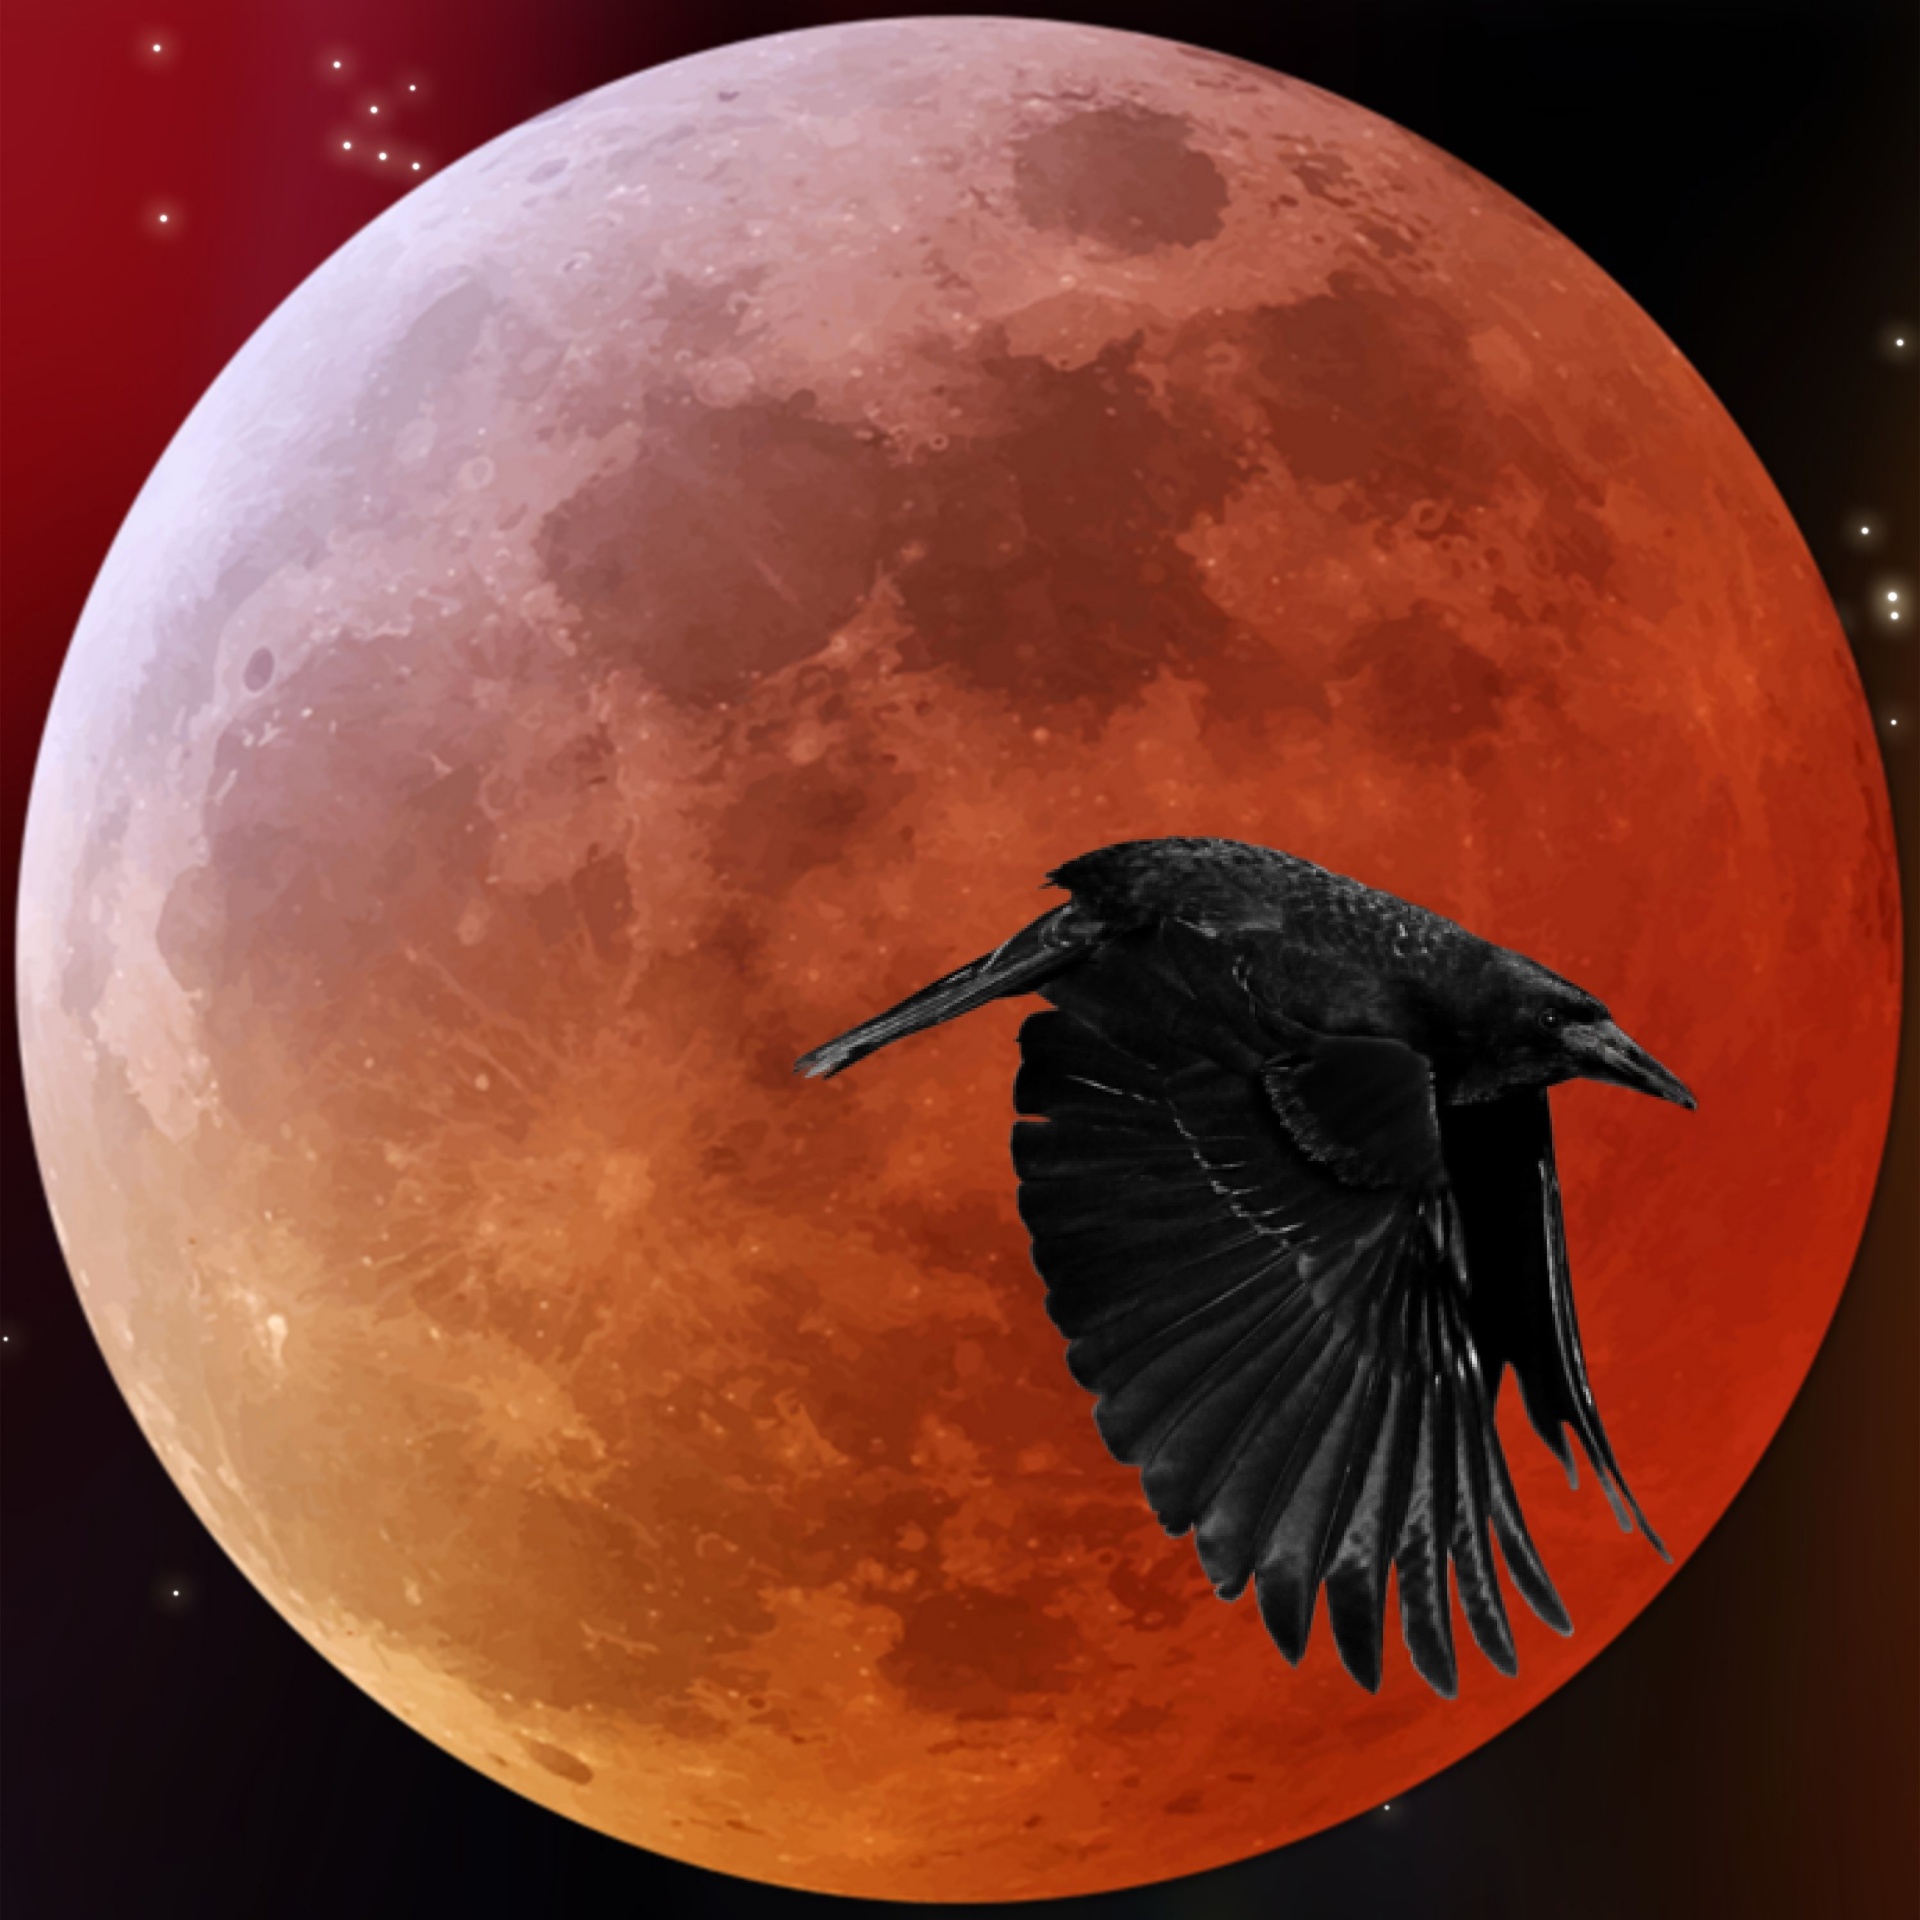 reddish full moon on galaxy background with a big raven flying in the foreground